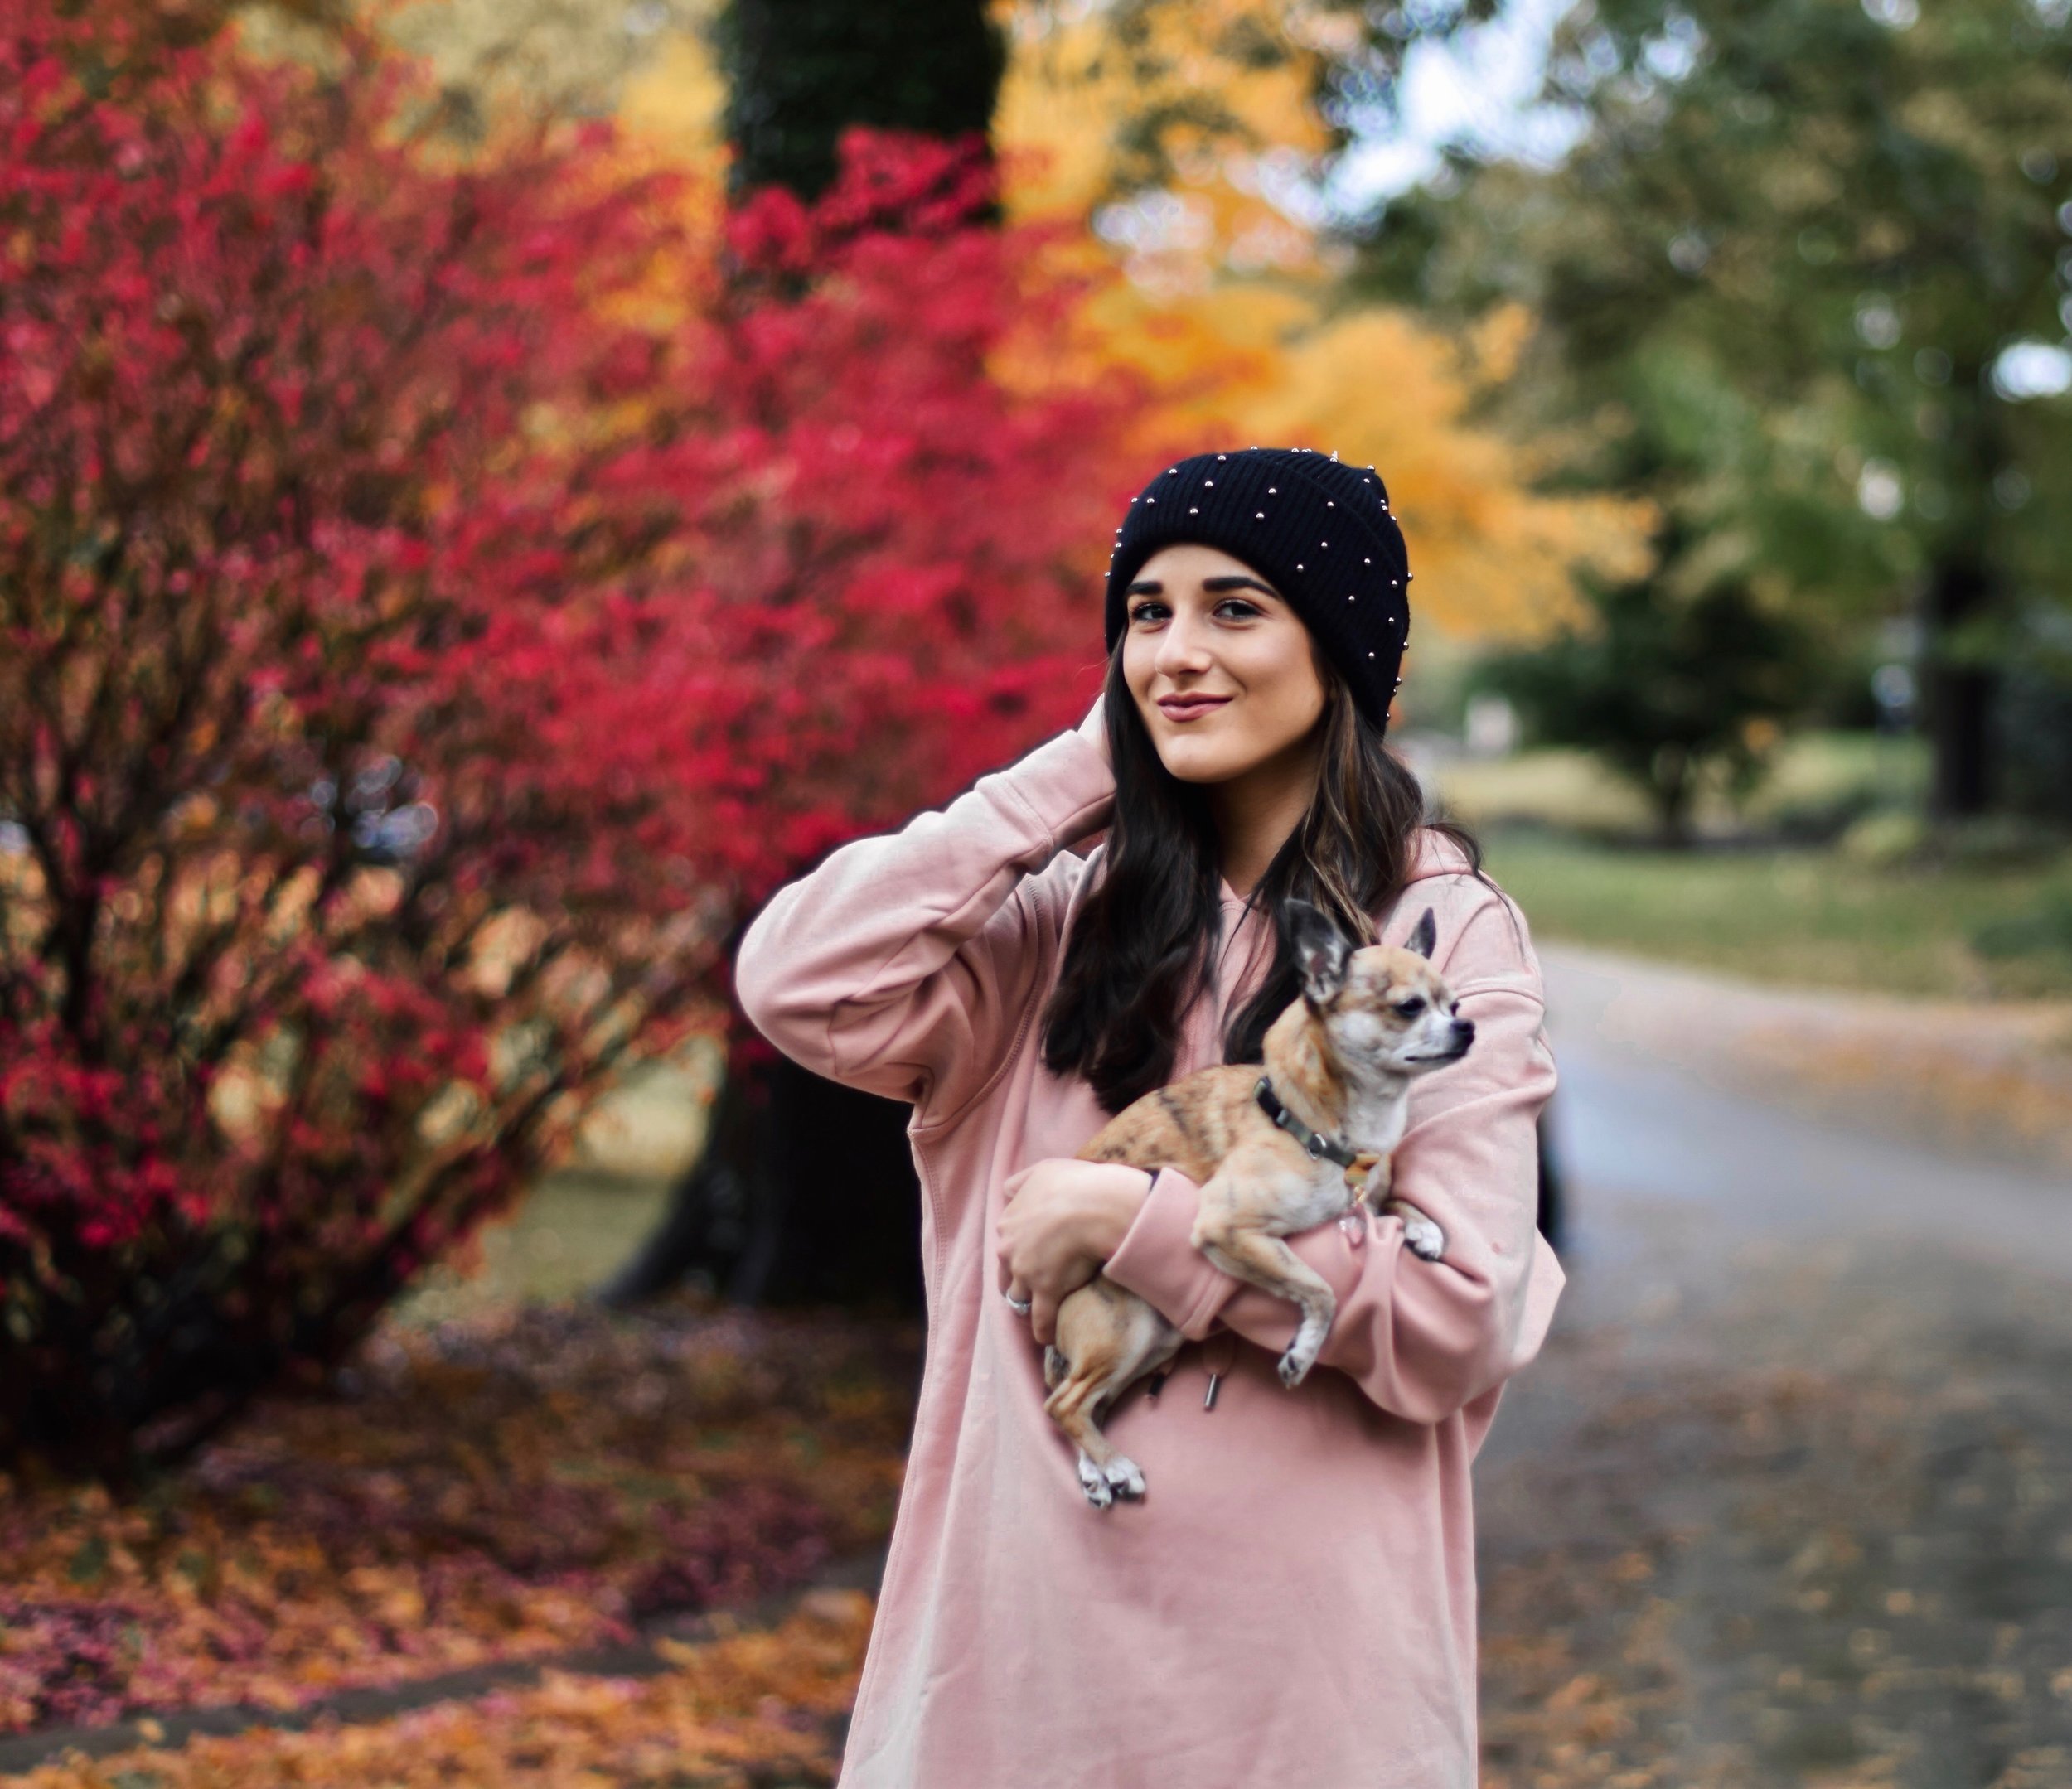 Getting Winter Ready With Macy's Esther Santer Fashion Blog NYC Street Style Blogger Outfit OOTD Trendy Chihuahua Pink Sweatshirt Dress Black Beanie Black Fur Booties Boots Shoes Fall Winter Outfit Tights Beautiful  H&M Shop Cute Puppy Dog Inspiration.jpg